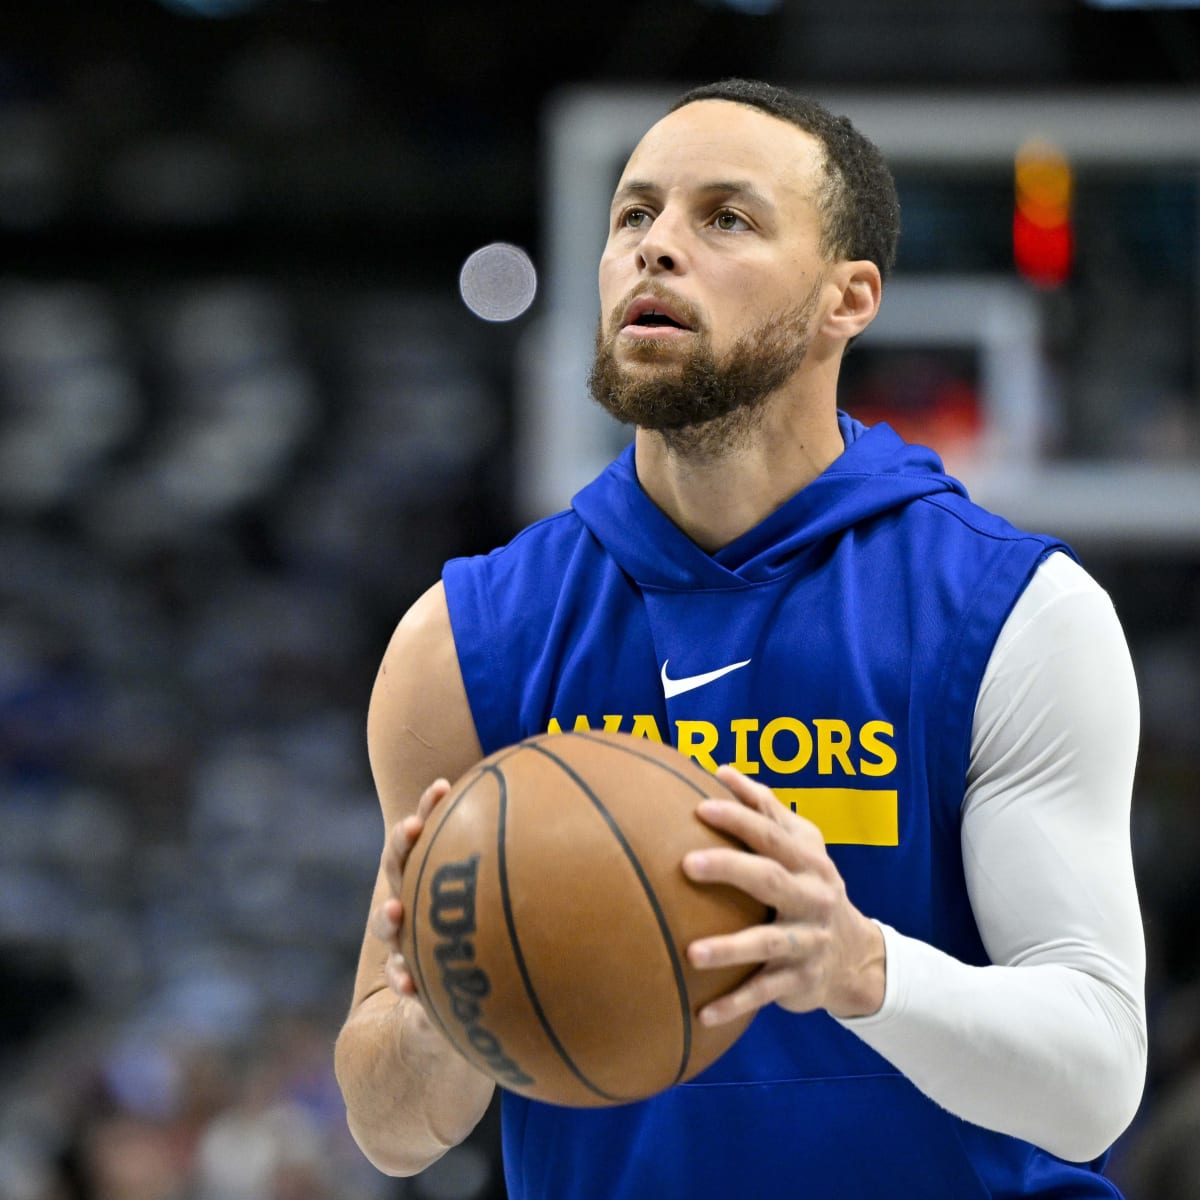 Steph Curry Goes Viral With Incredible Appearance - Inside the Warriors